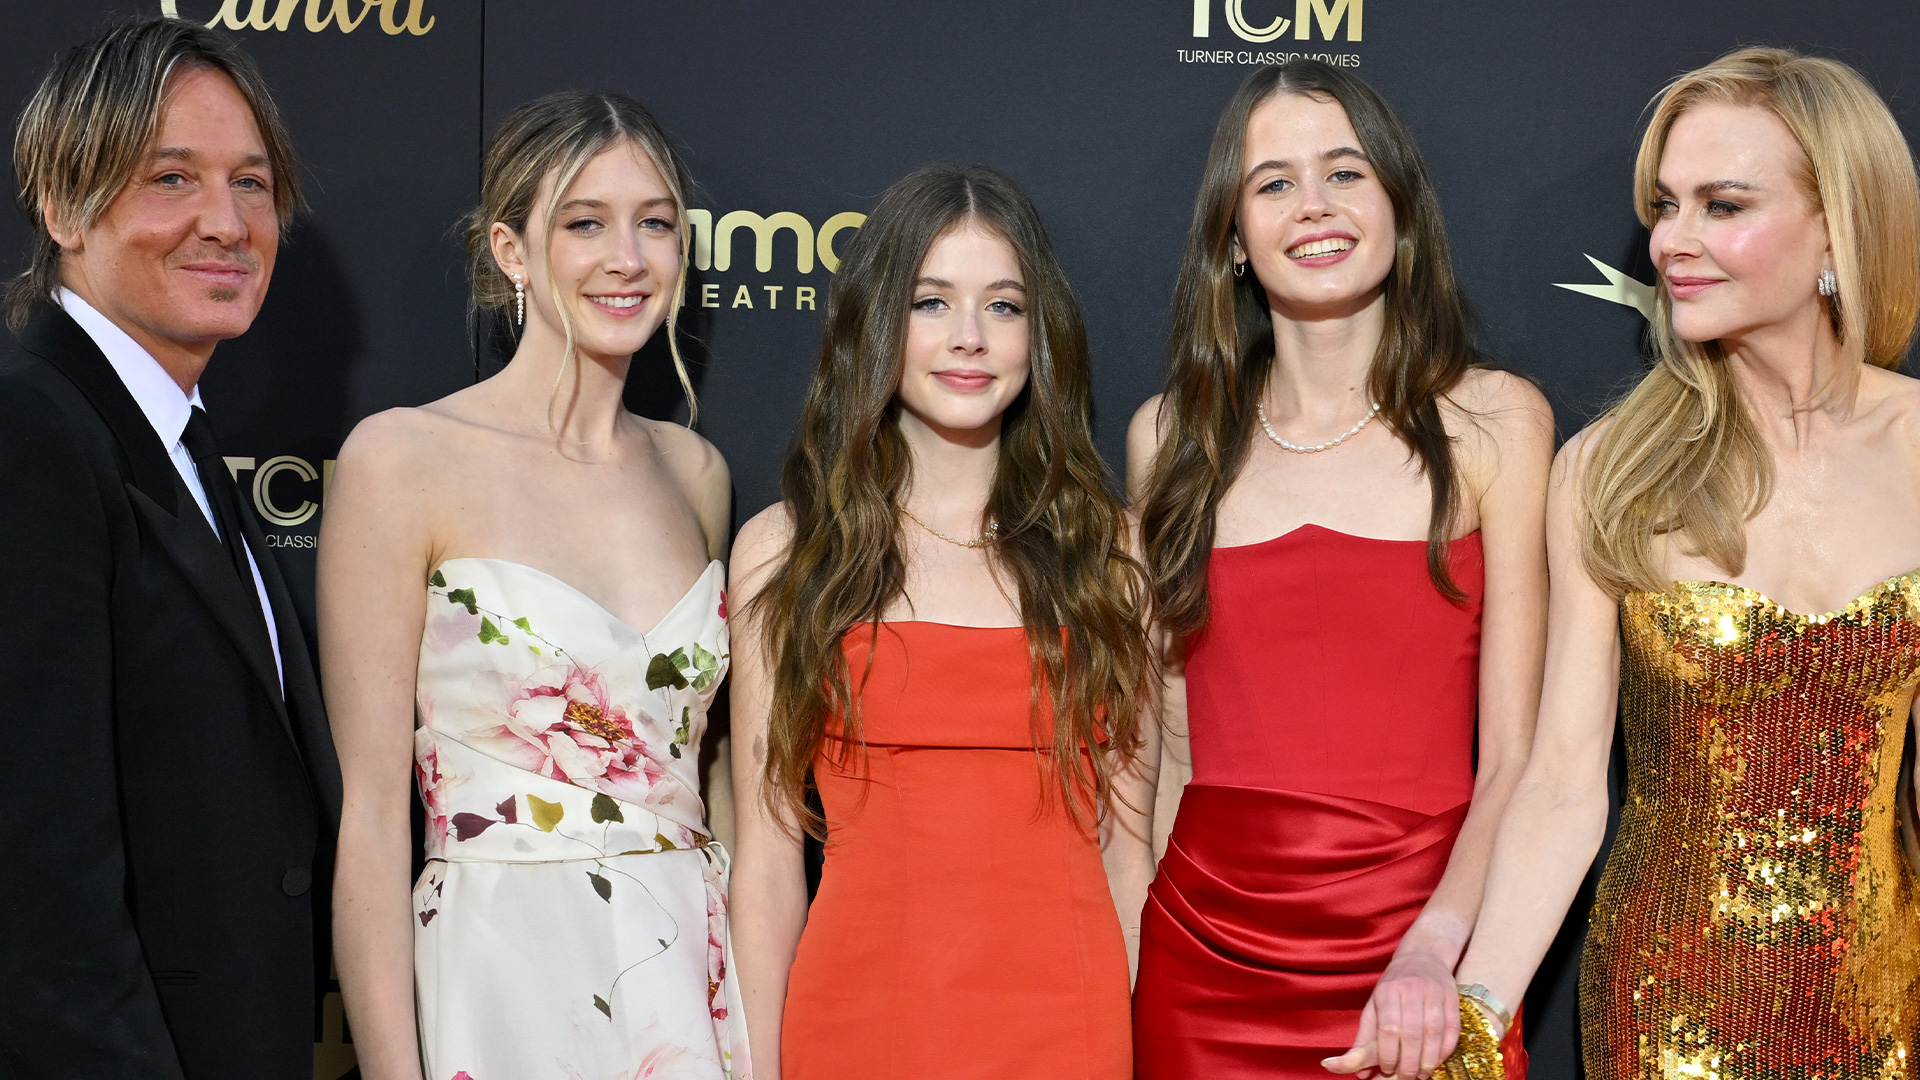 Nicole Kidman and Keith Urban’s rarely-seen daughters Sunday, 15, and Faith, 13, make red carpet appearance in LA [Video]